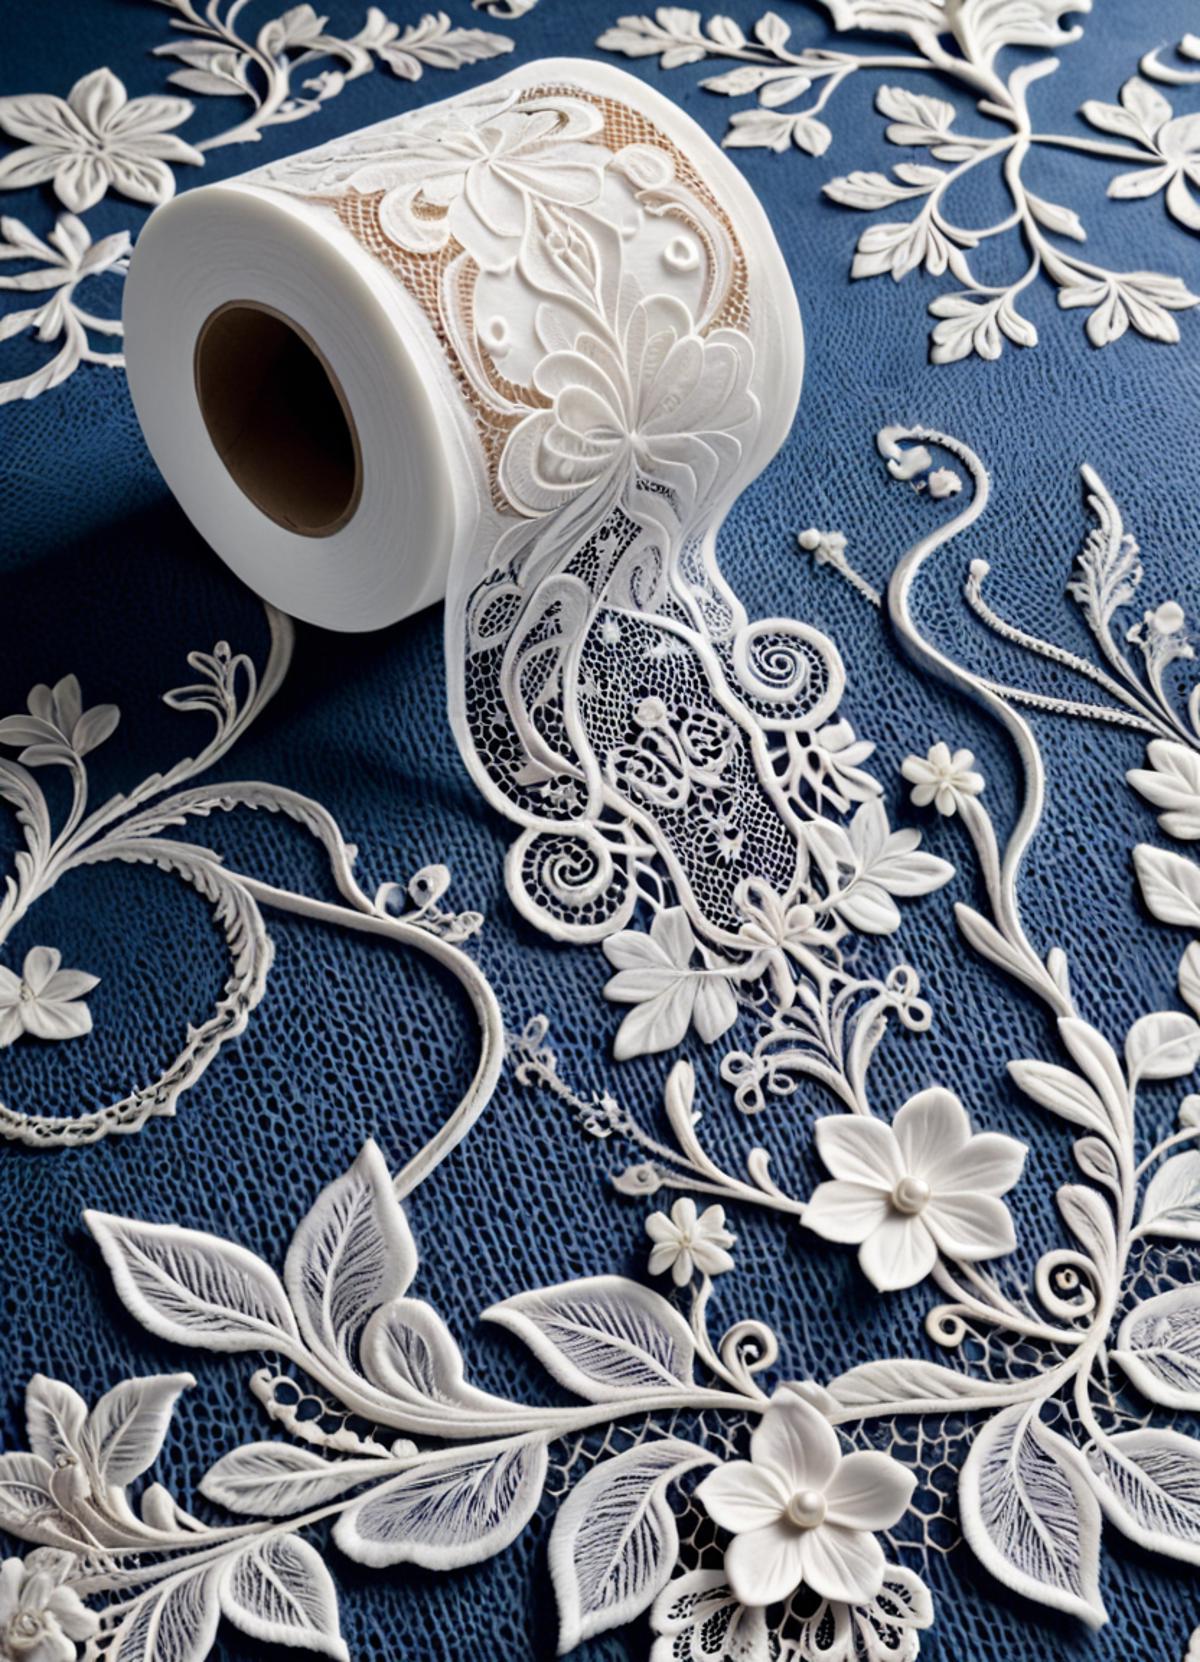 White Toilet Paper Roll with Lace Design on Blue Background